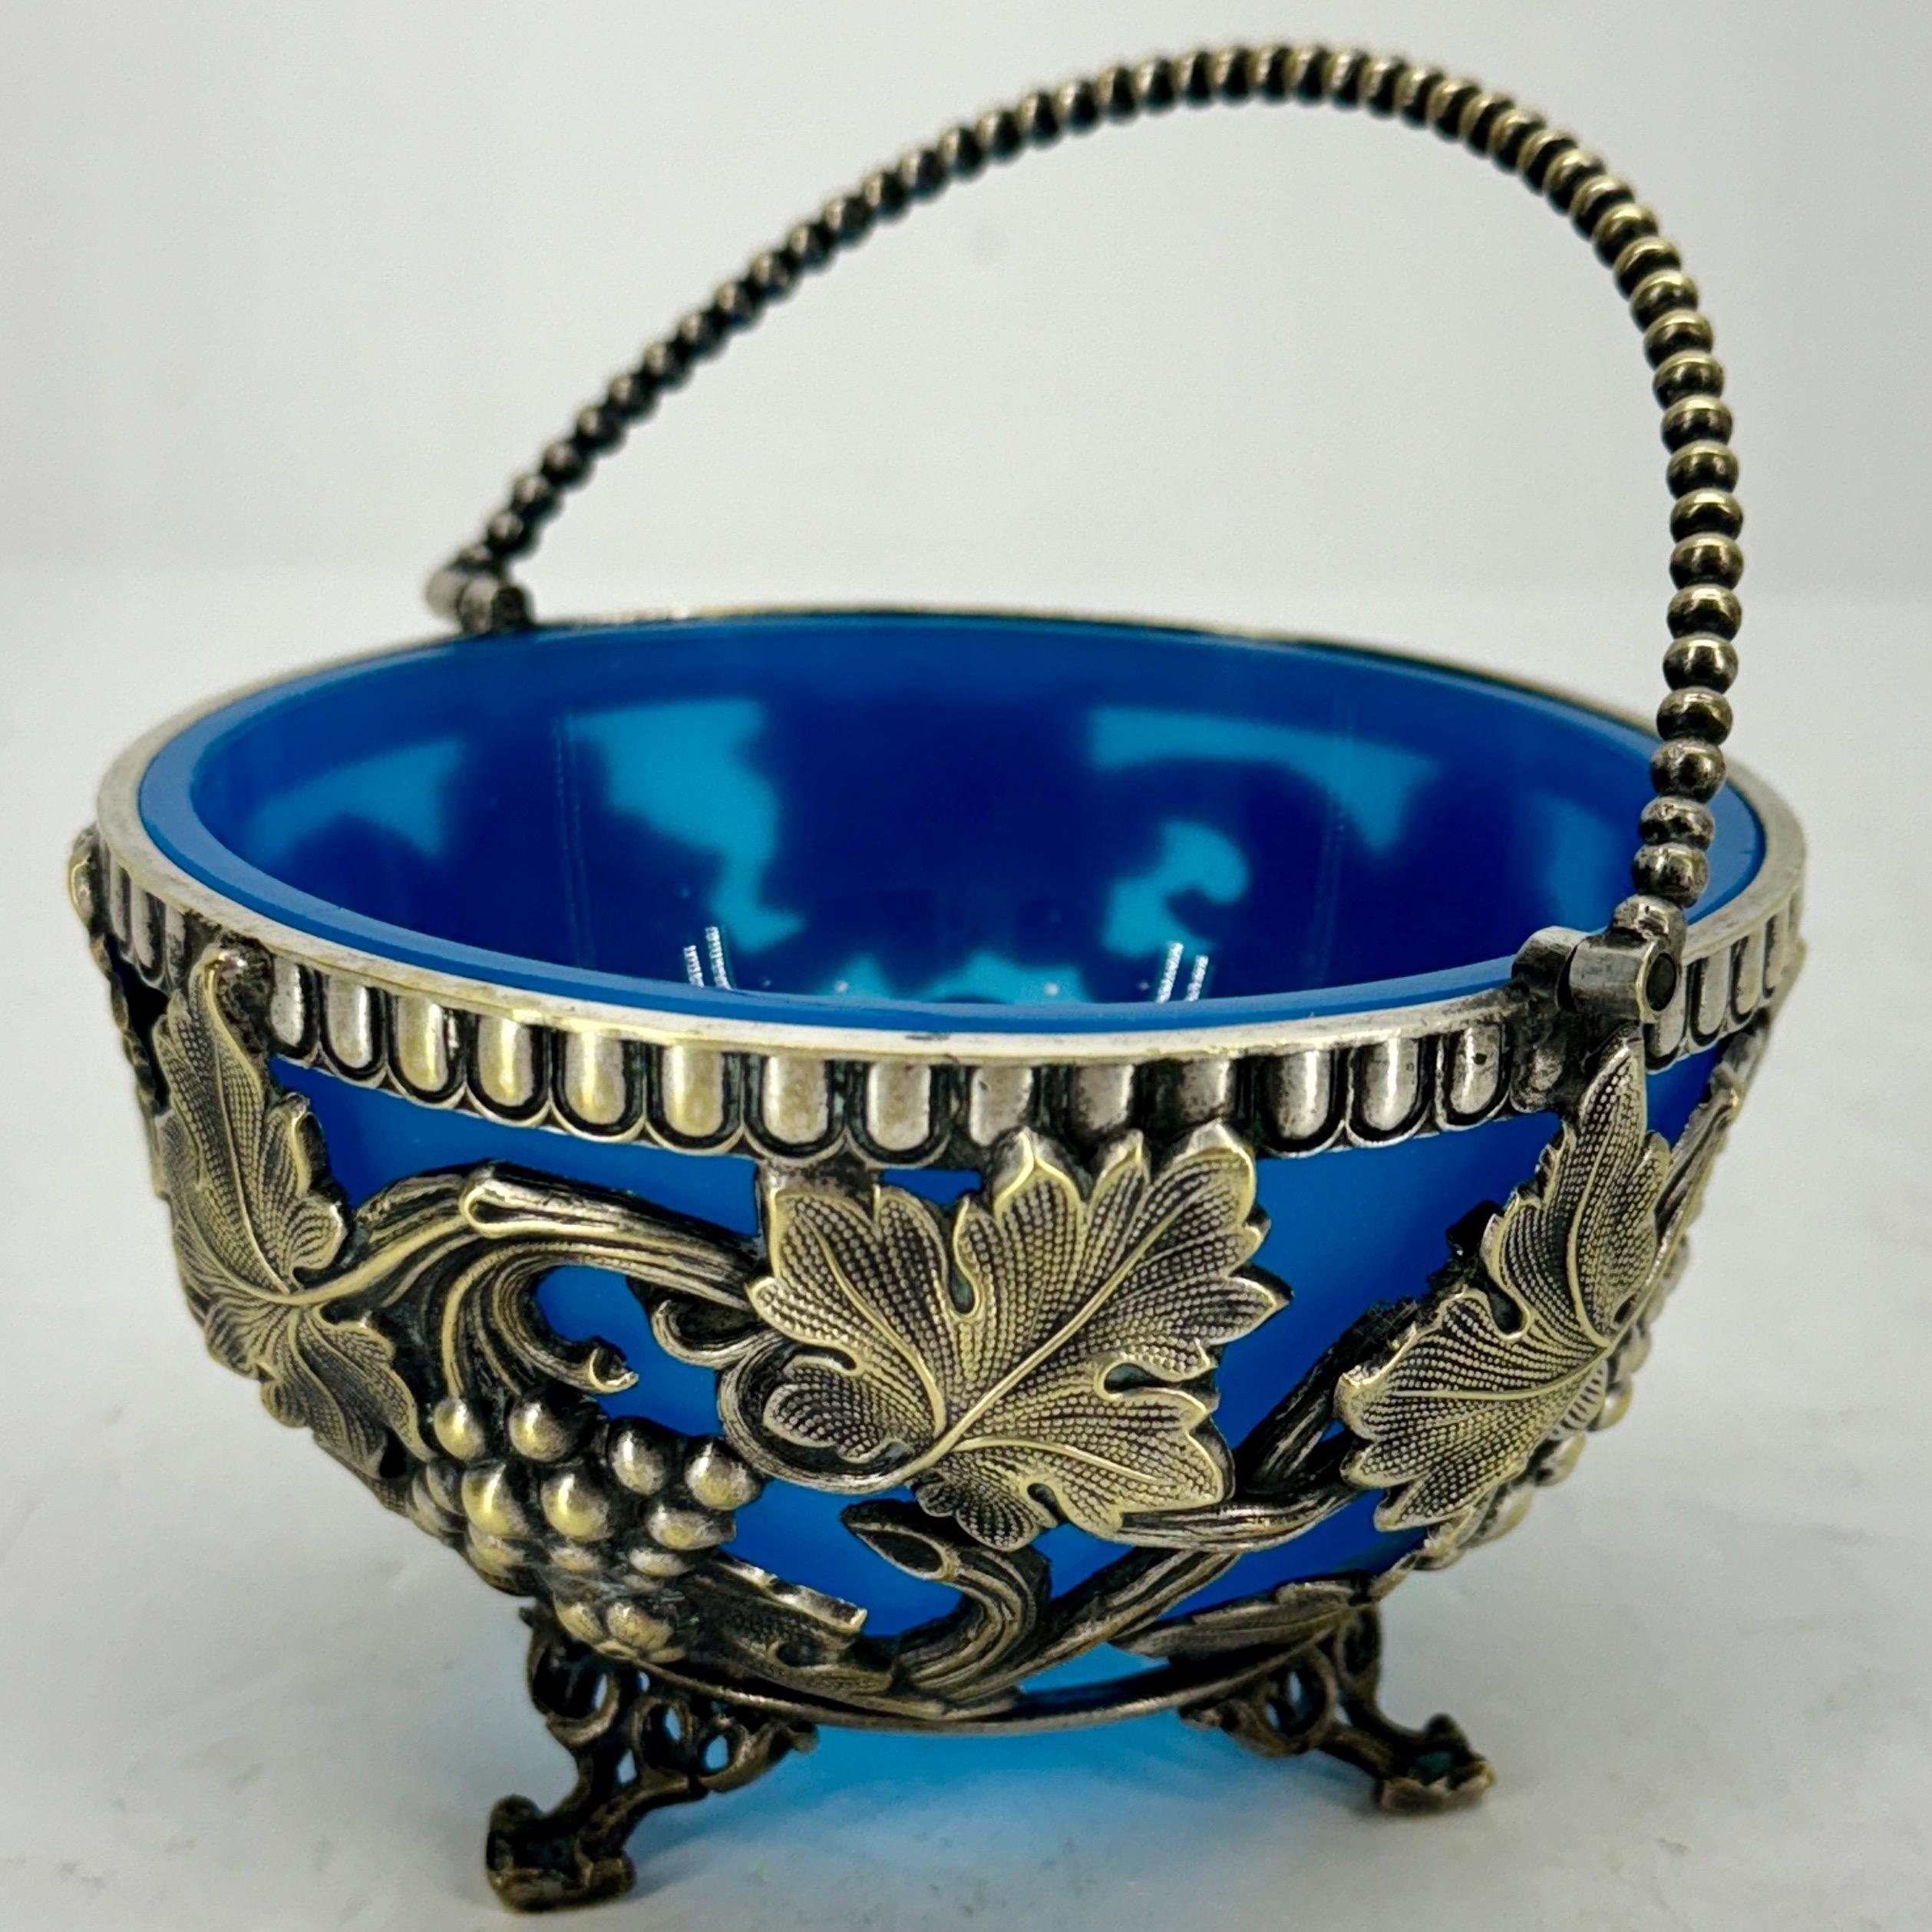 English Sugar or Candy Bowl in Silver-Plate and Blue Opaline Glass, circa 1880-1900. The Sheffield Silver base has an amazing pearl string handle.